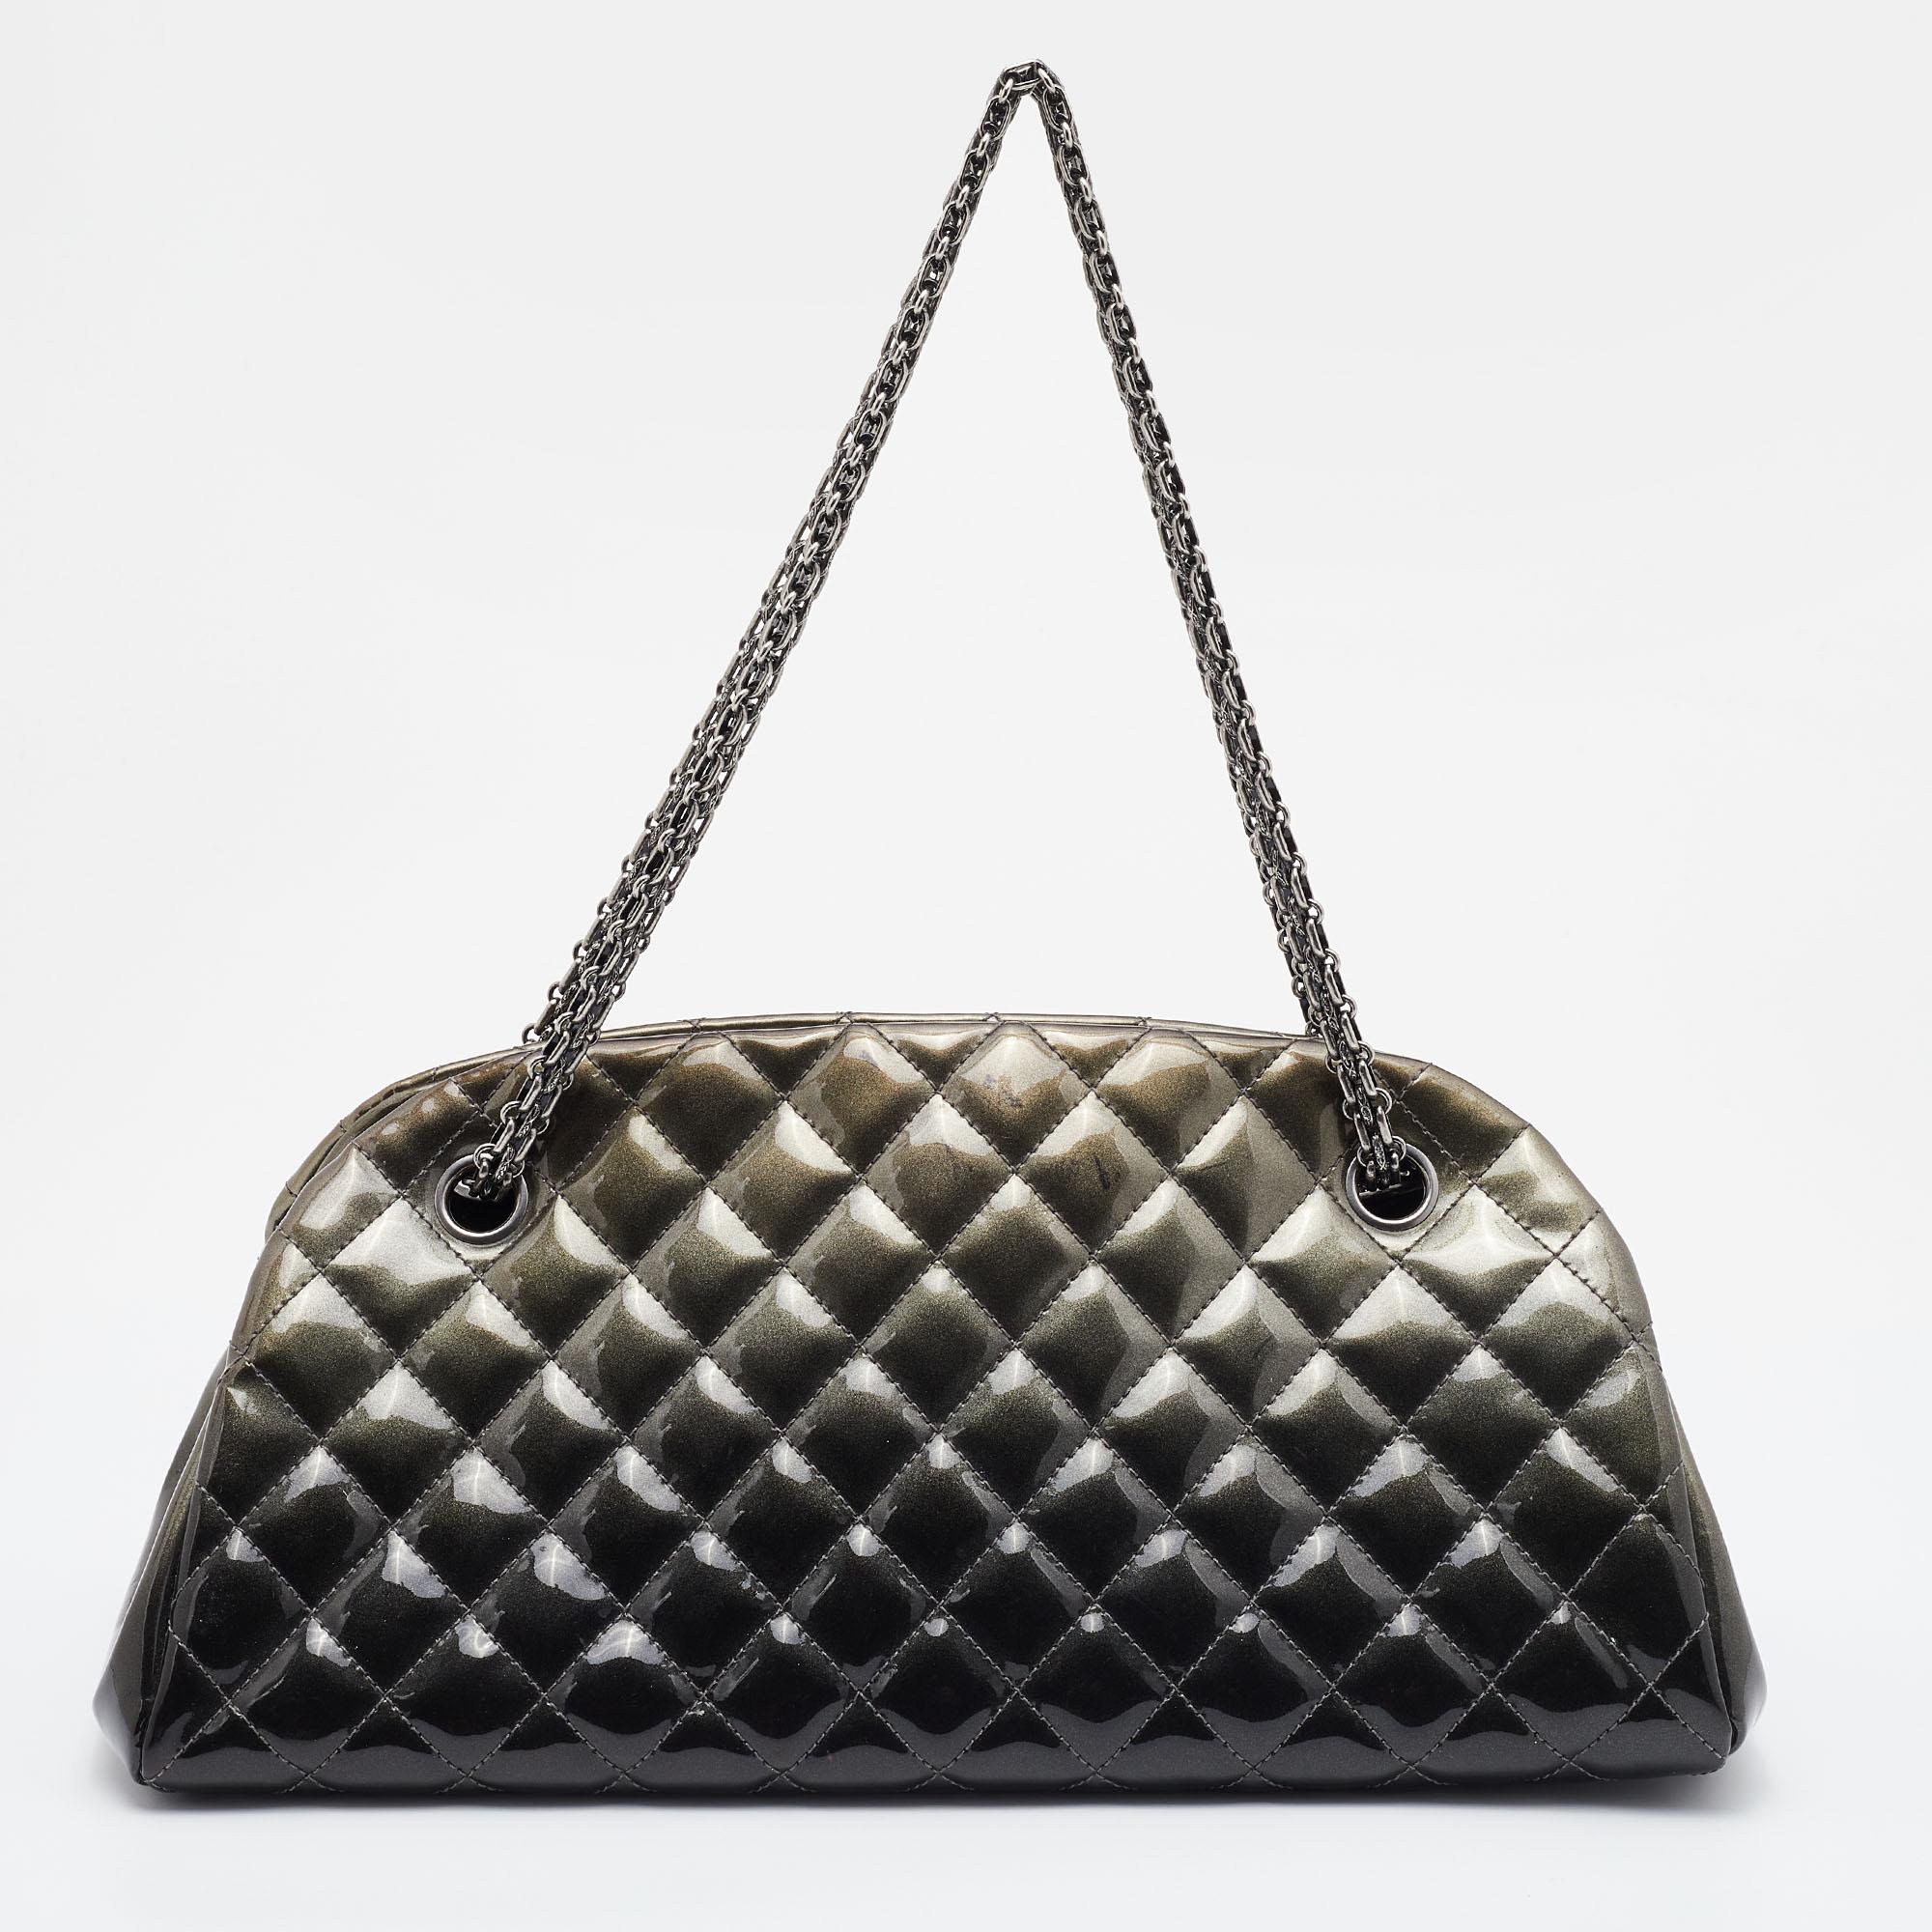 Striking a beautiful balance between essentiality and opulence, this Just Mademoiselle Bowler bag from the House of Chanel ensures that your handbag requirements are taken care of. It is equipped with practical features for all-day ease.

